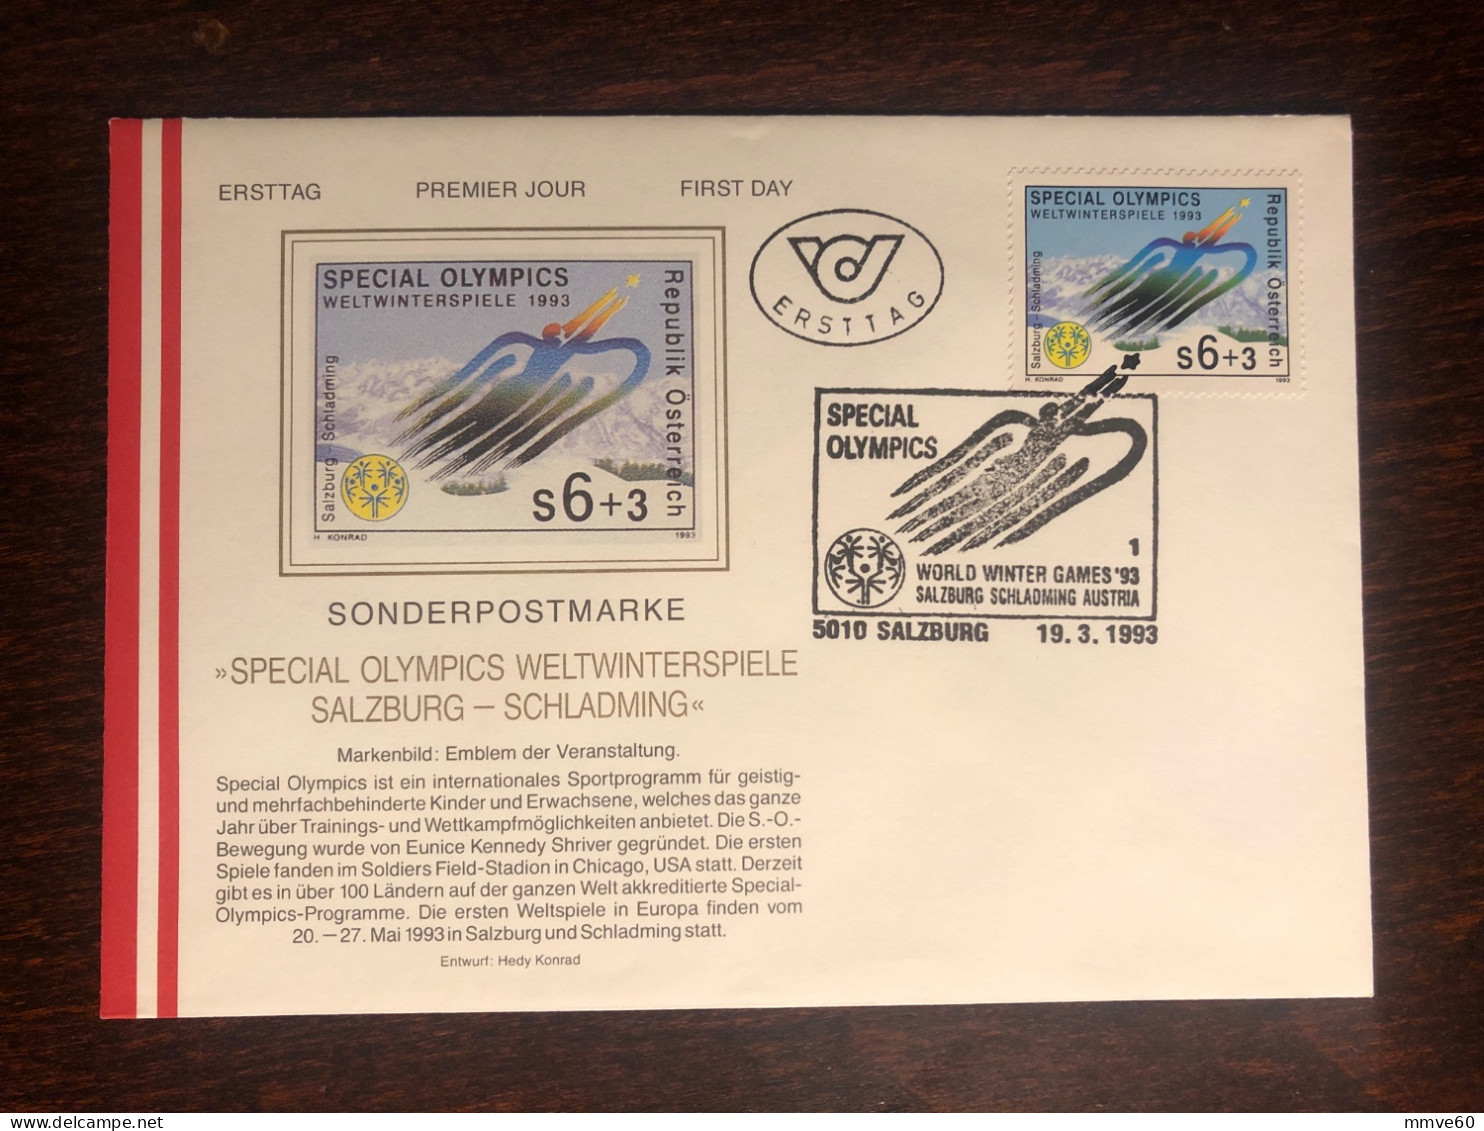 AUSTRIA FDC COVER 1993 YEAR SPECIAL OLYMPICS DISABLED IN SPORT PARALYMPIC HEALTH MEDICINE STAMPS - Covers & Documents